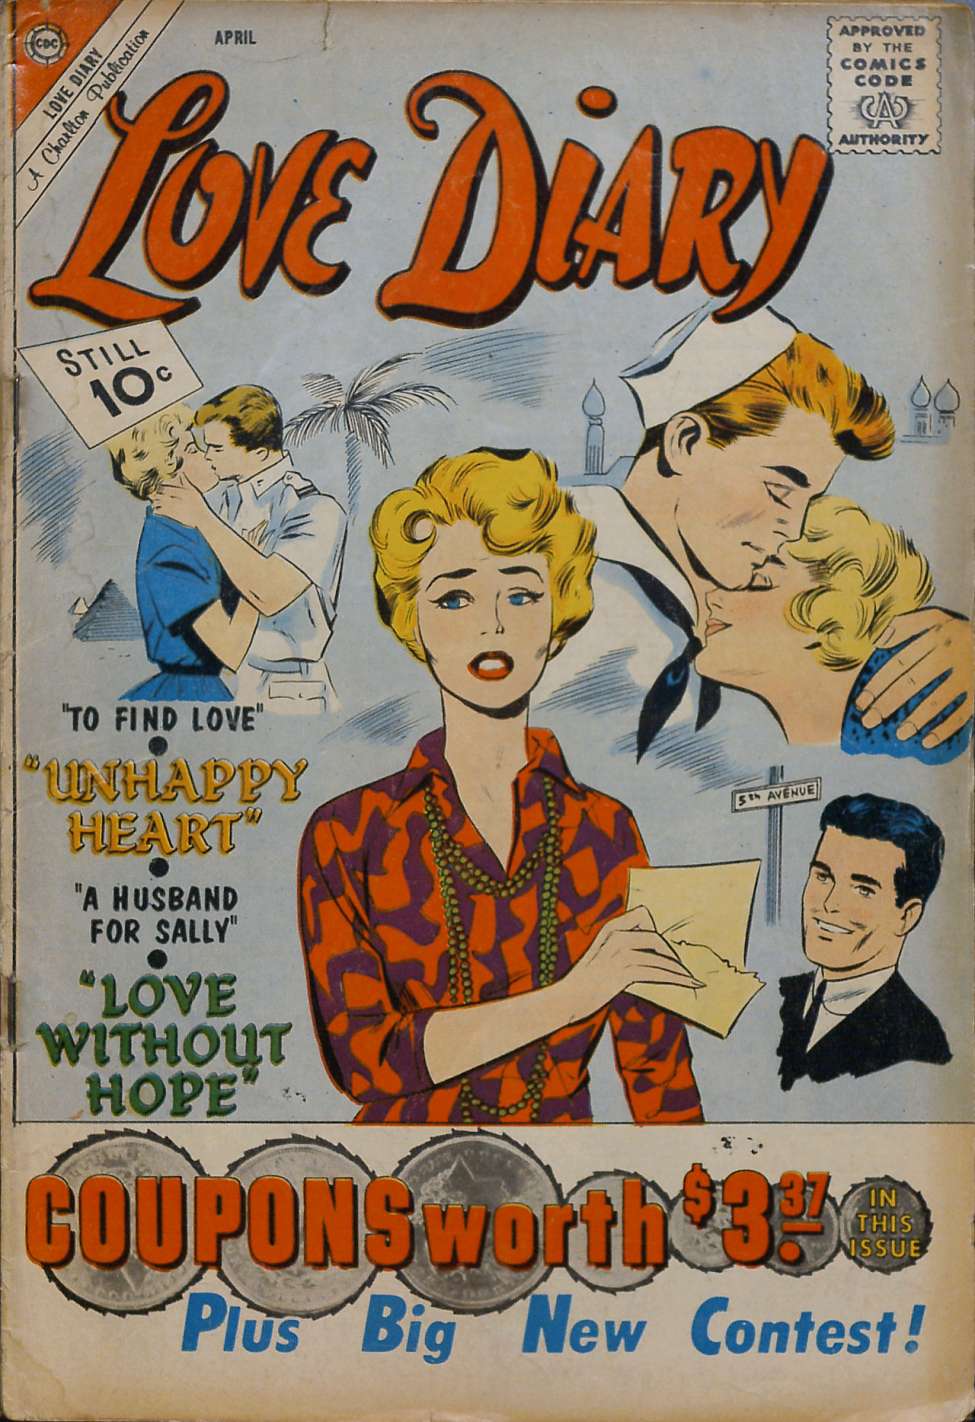 Book Cover For Love Diary 15